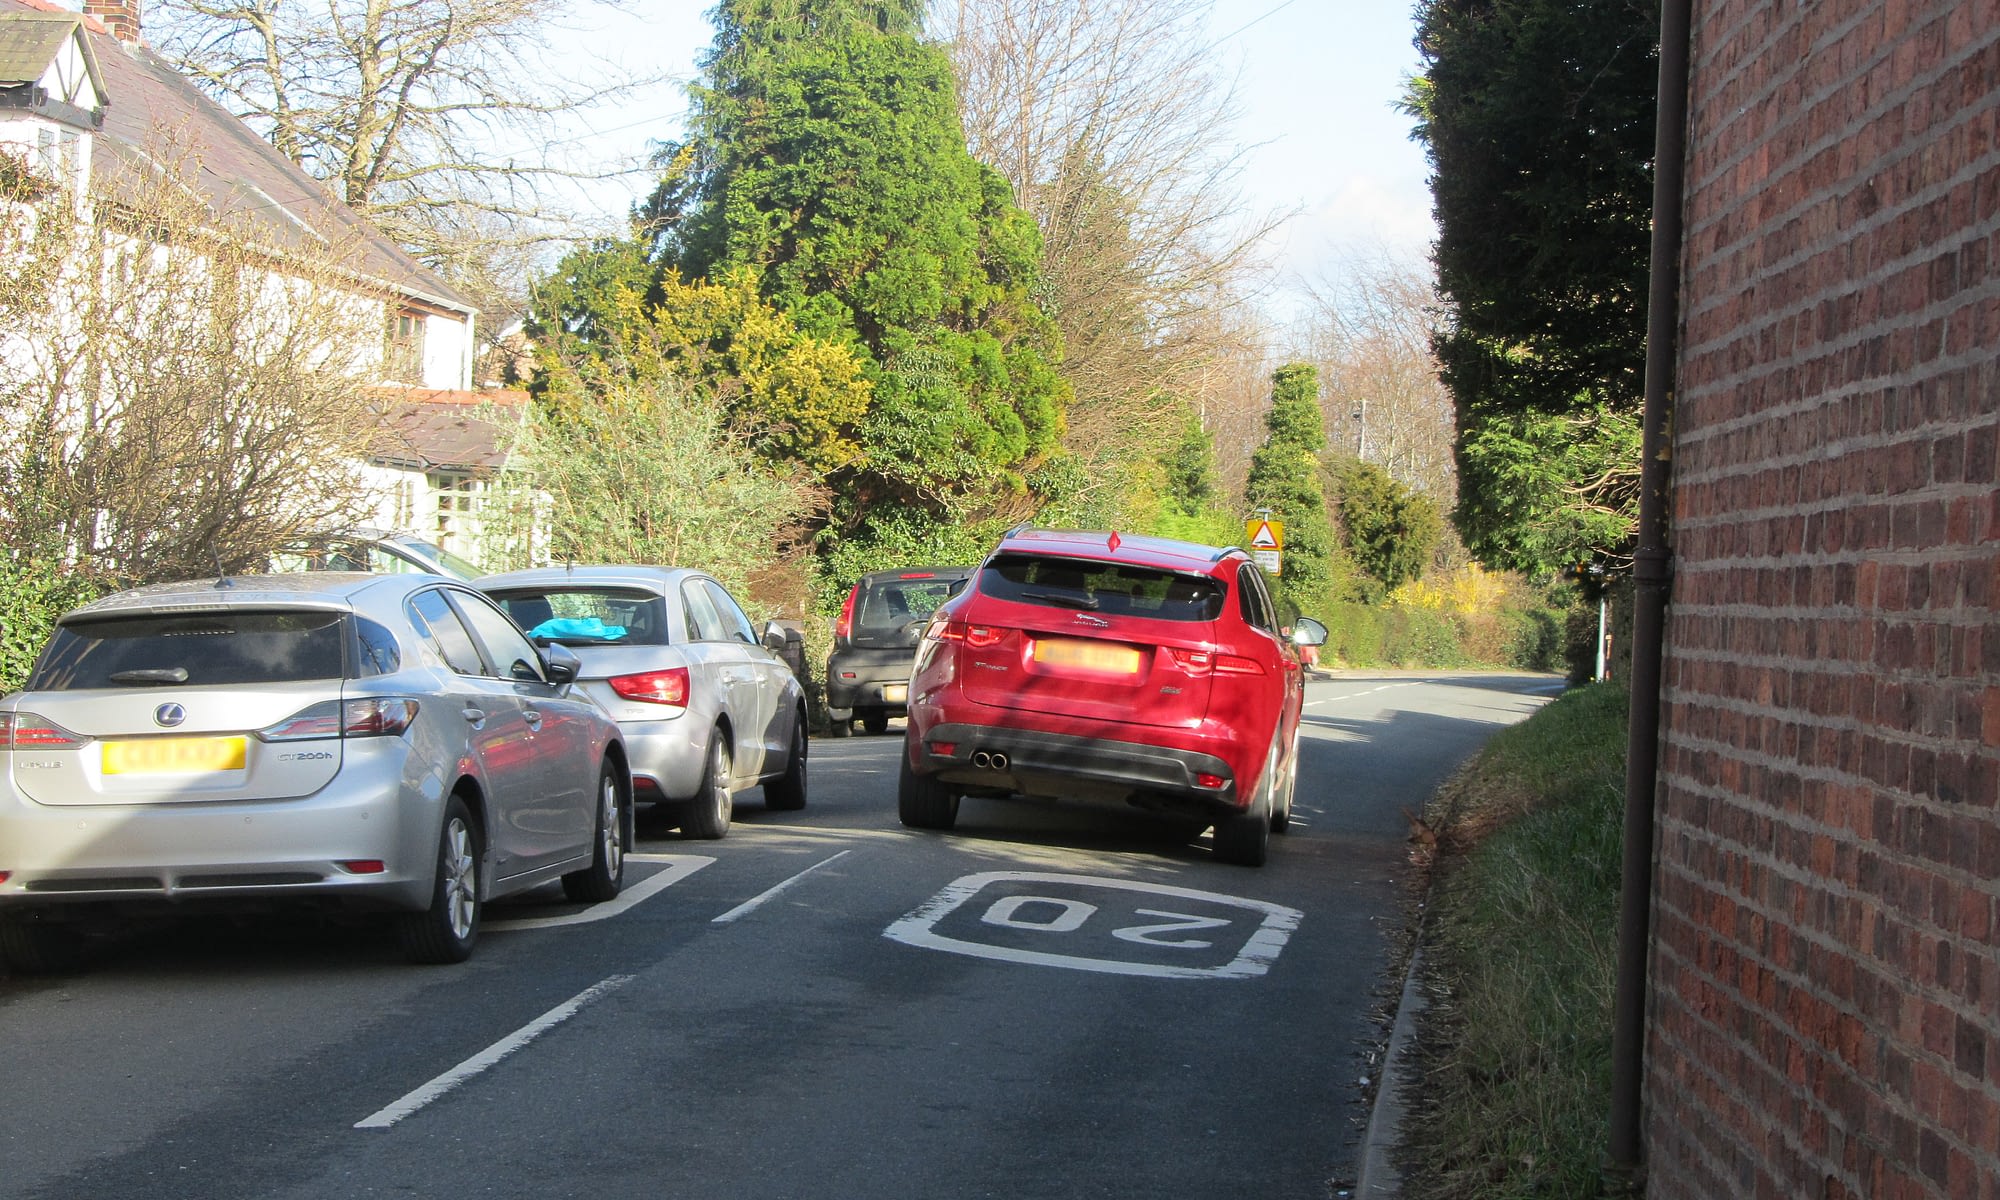 Image showing restrictive pedestrian access on Holt Road.